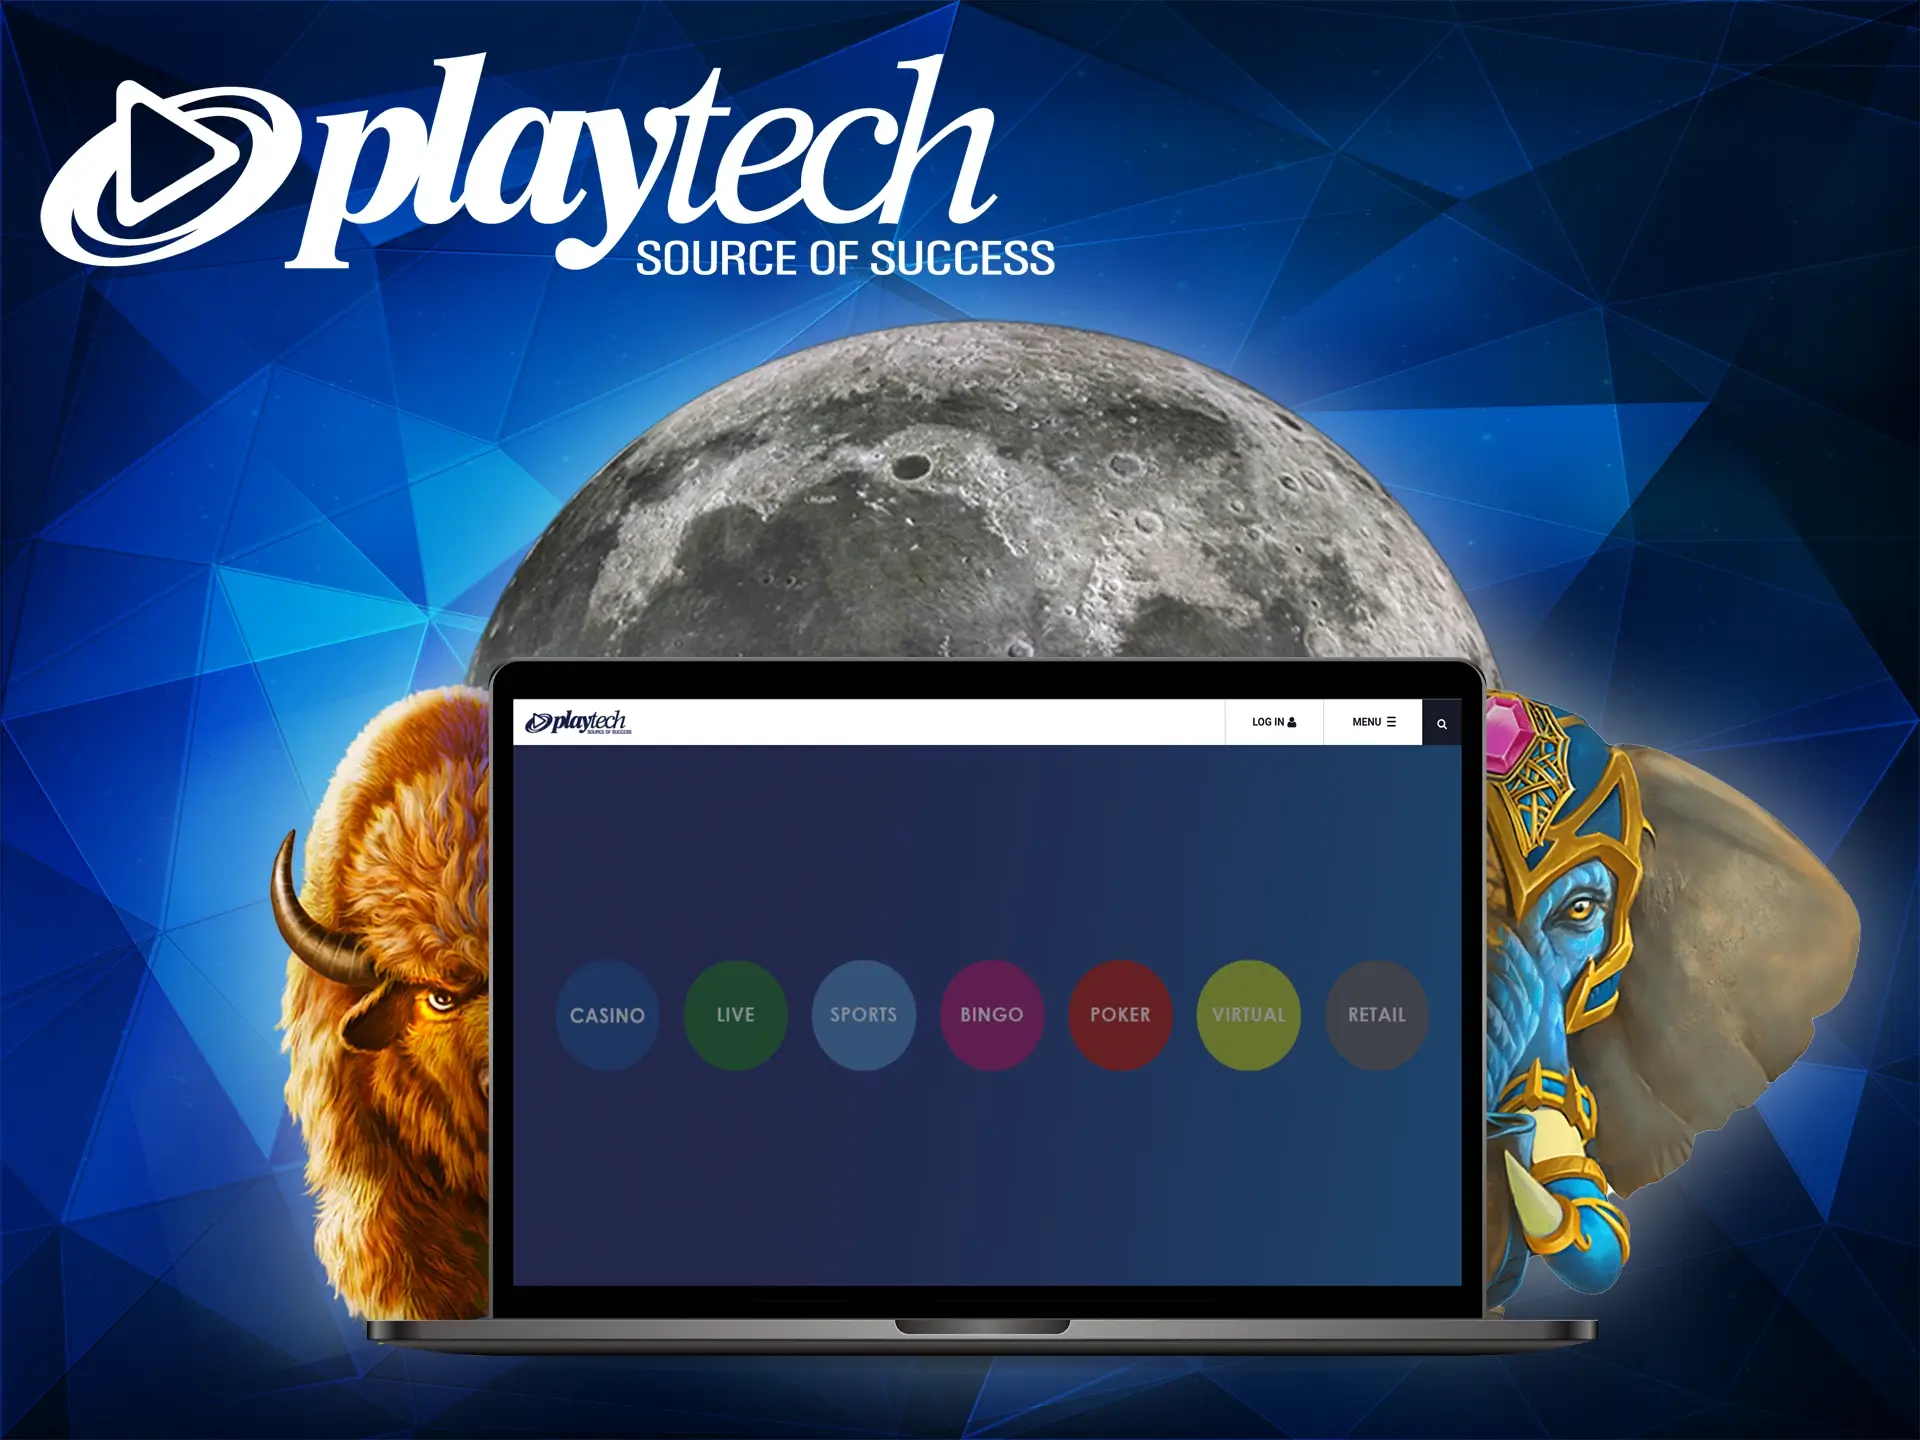 At Playtech you will find a variety of games, try the best of them.